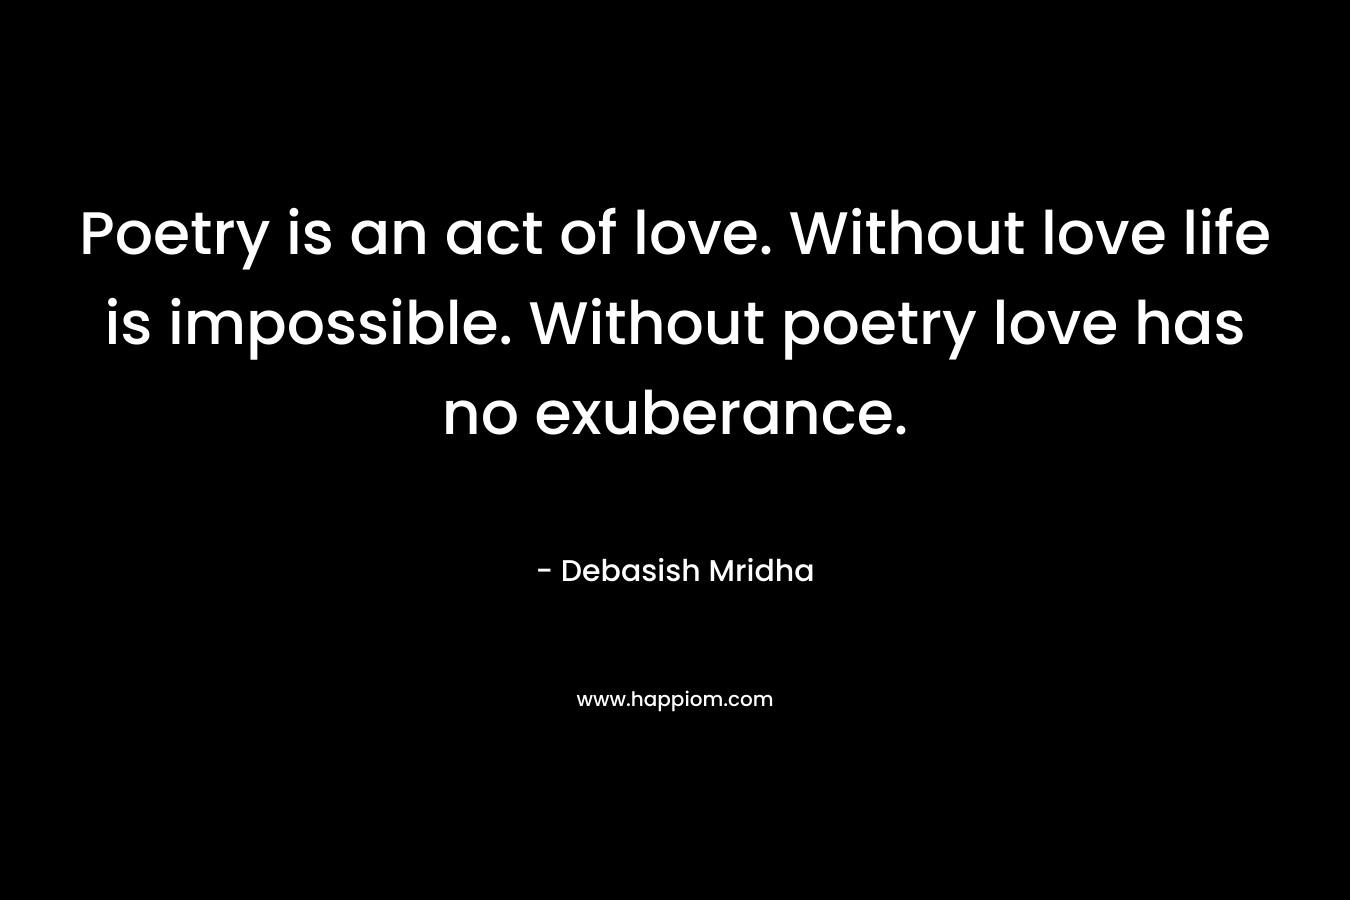 Poetry is an act of love. Without love life is impossible. Without poetry love has no exuberance.